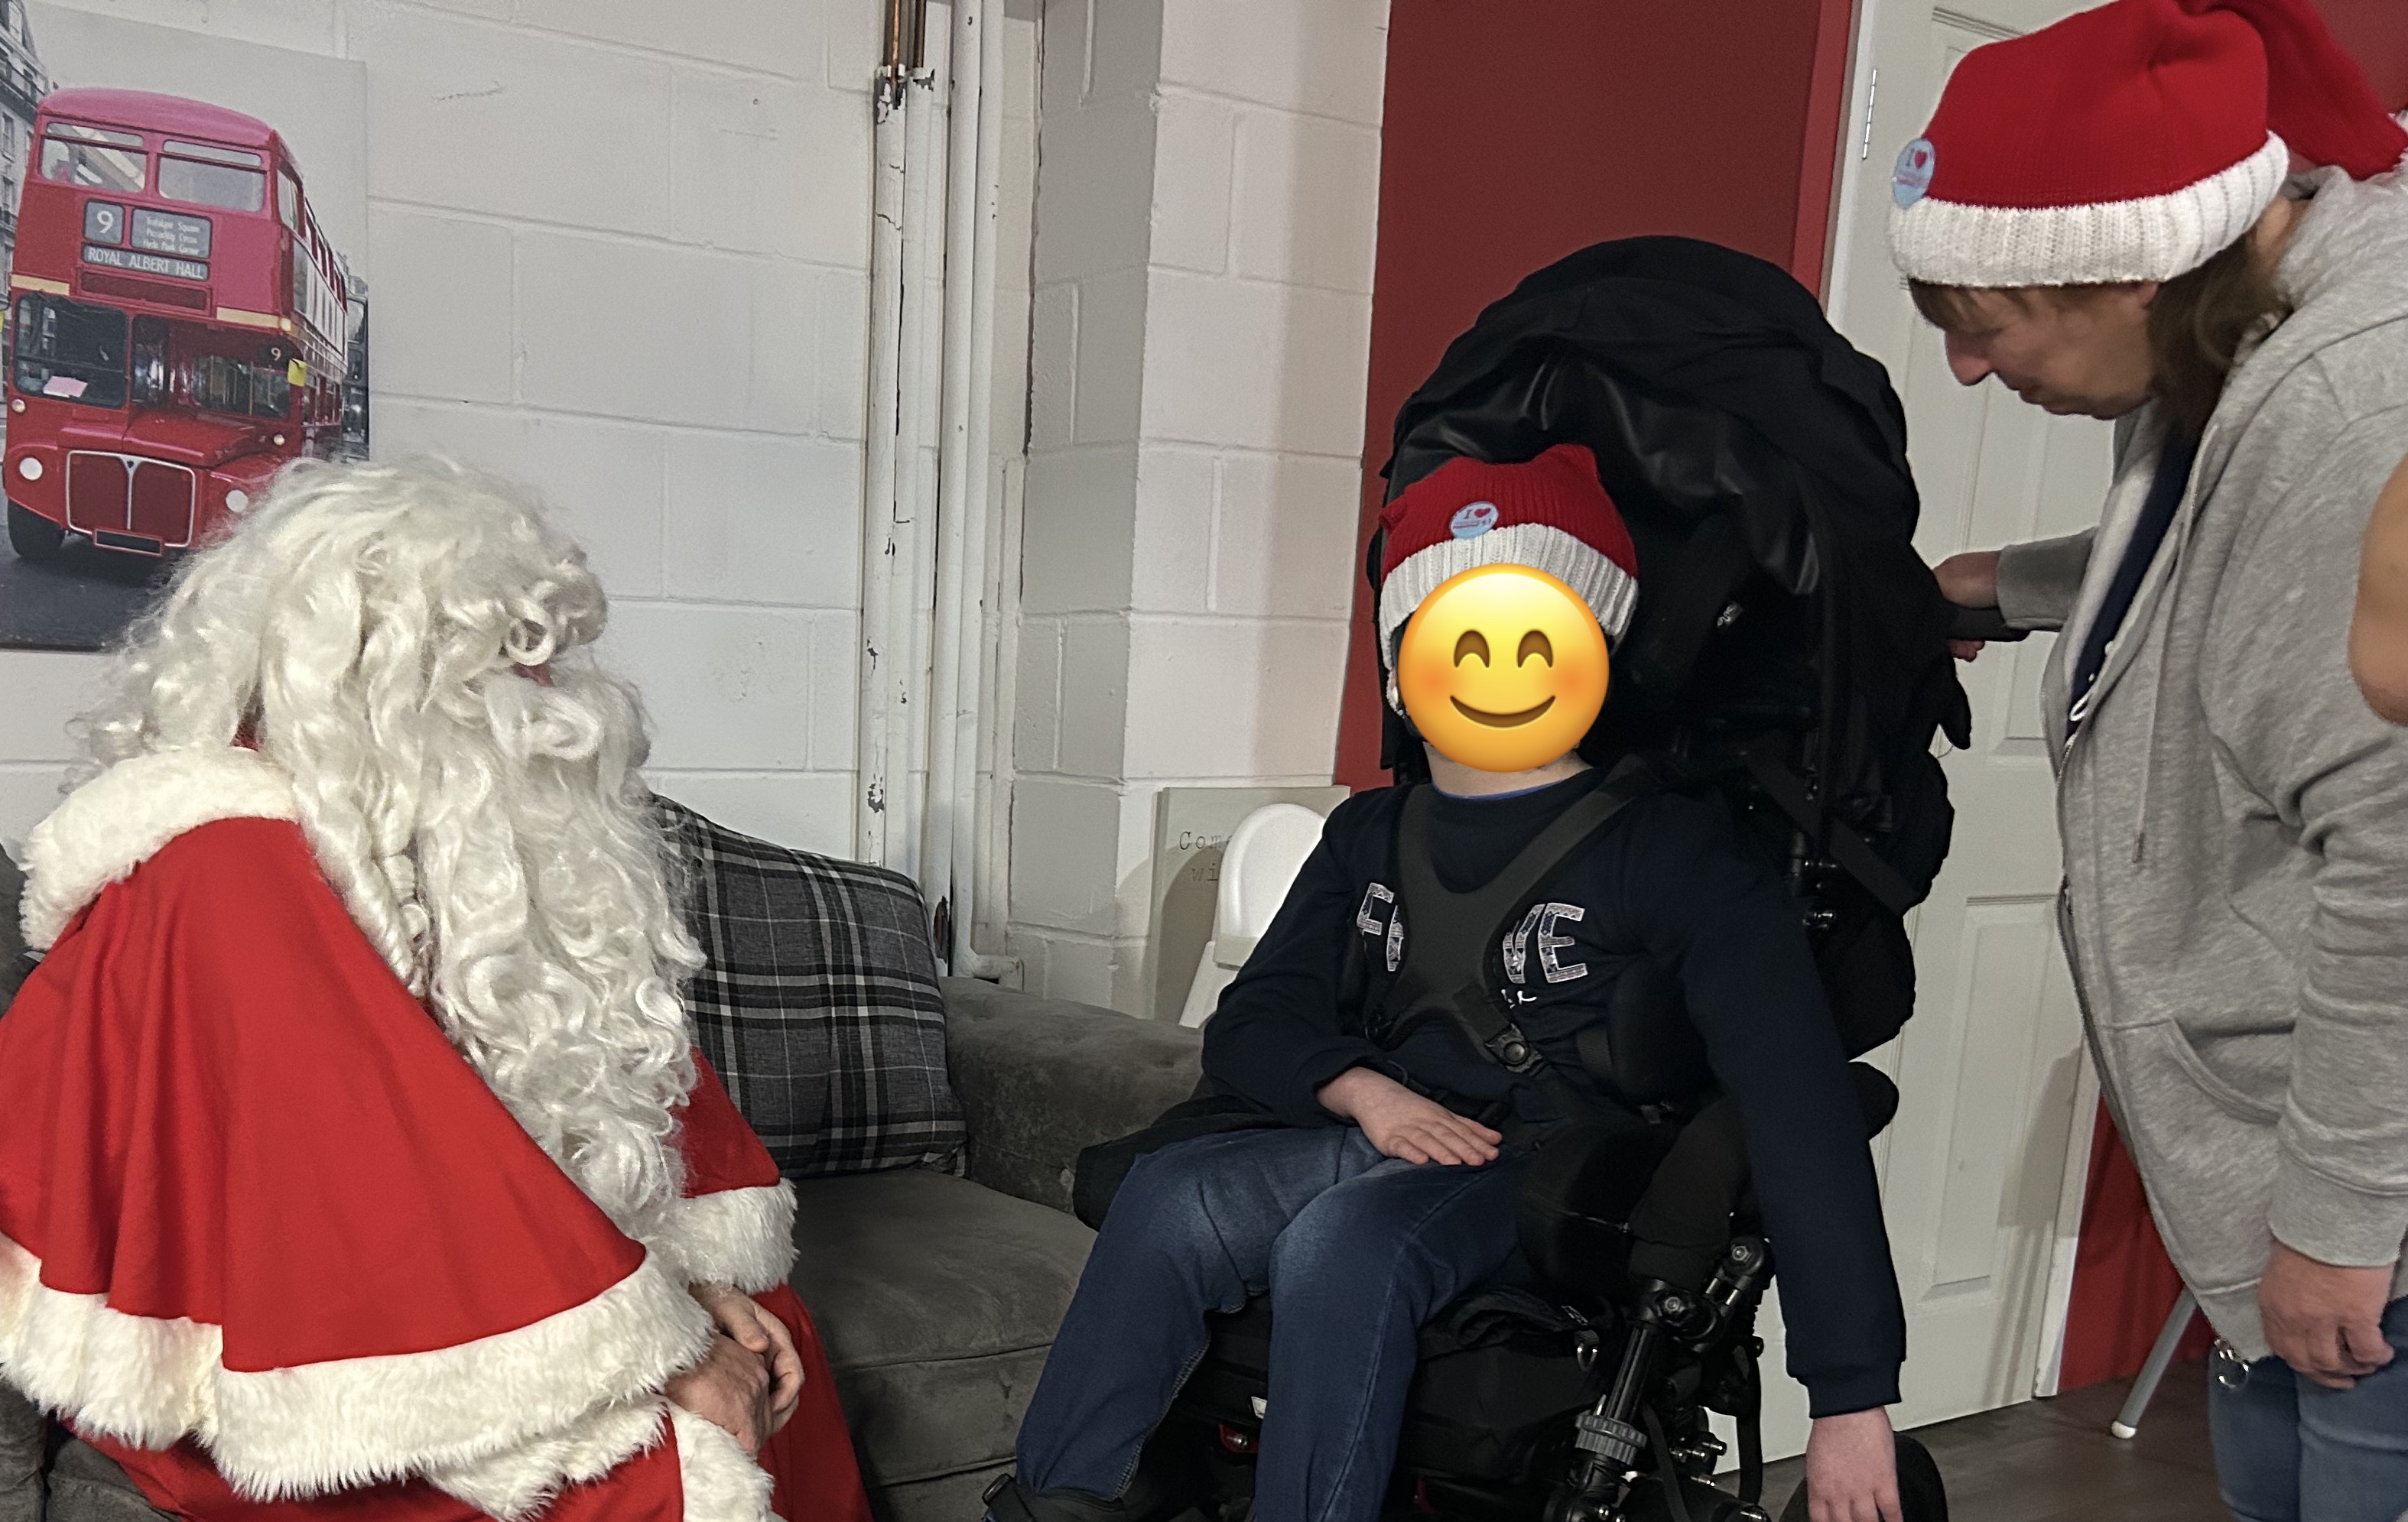 Foster carers and the children also met Santa for an early Christmas gift!